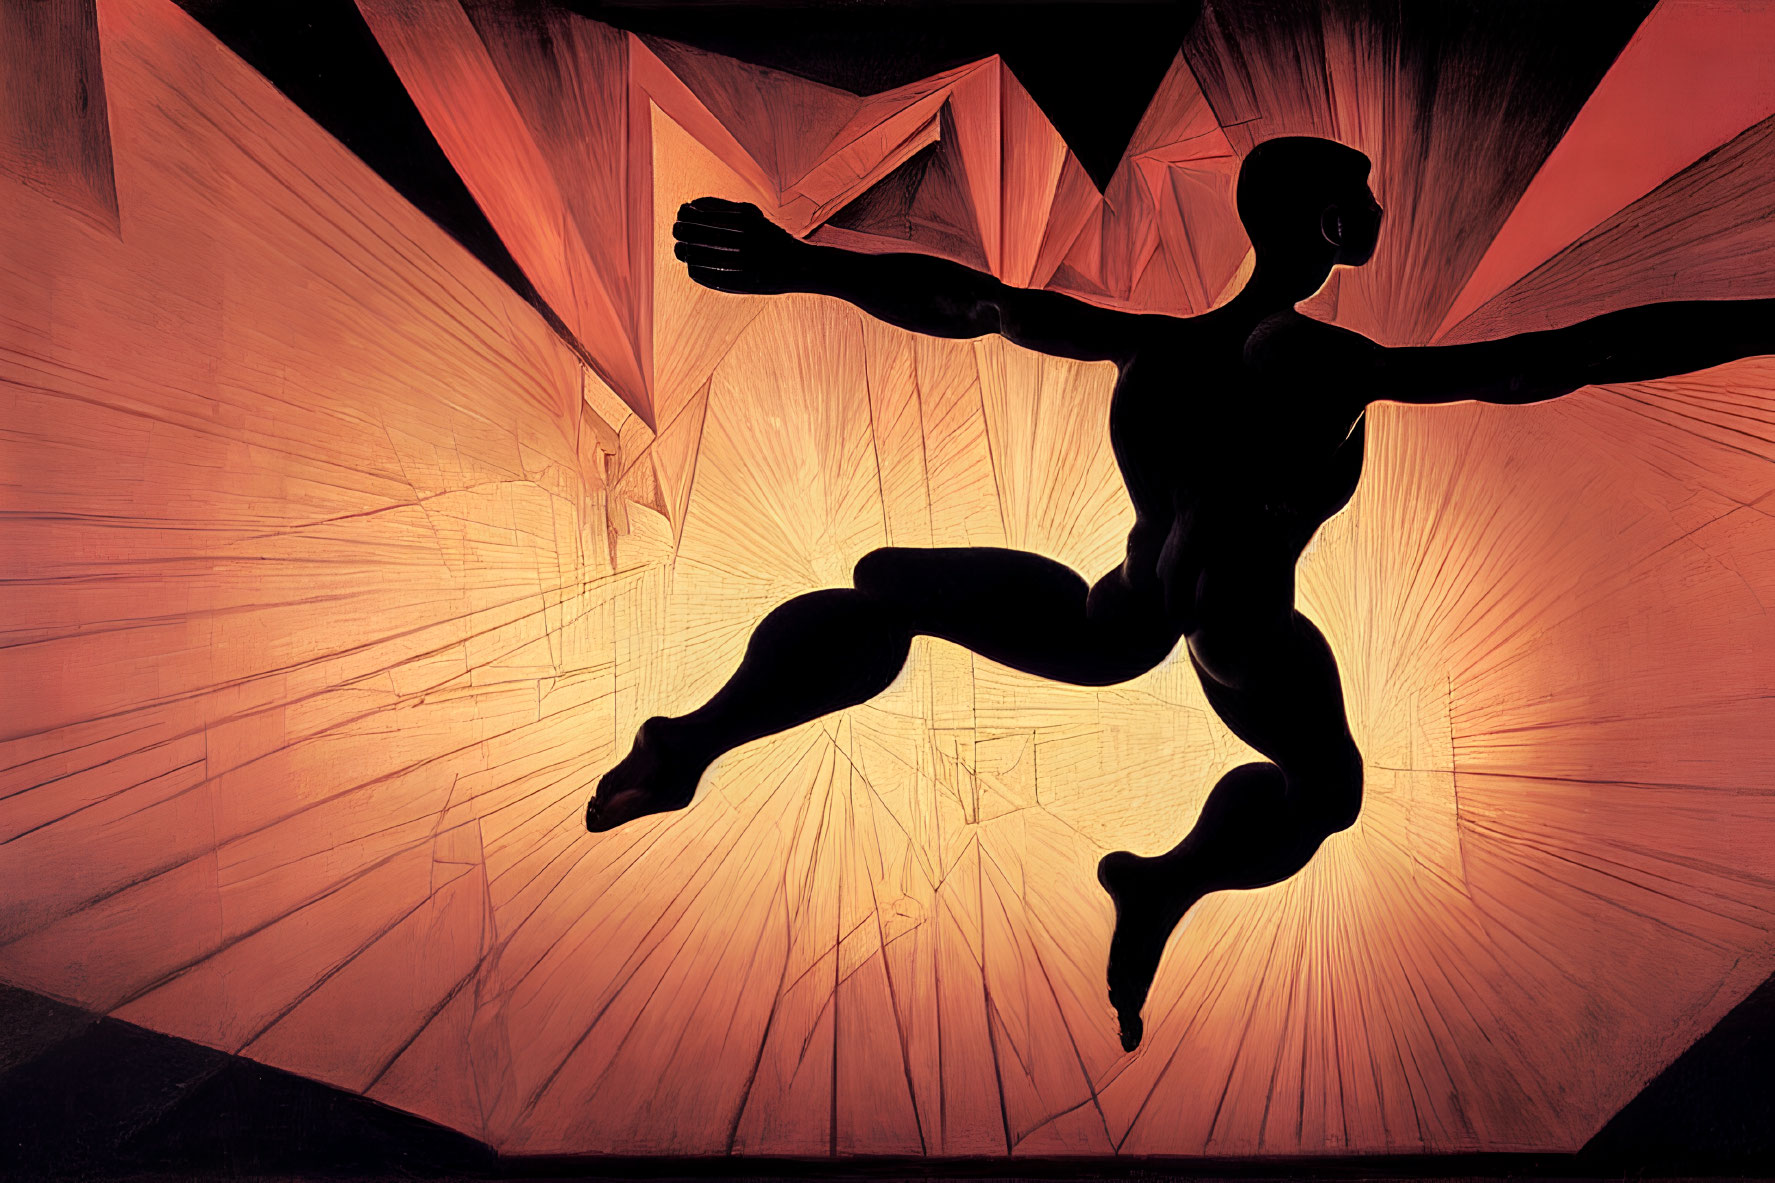 Dynamic Silhouette Leaping Against Abstract Red and Orange Background